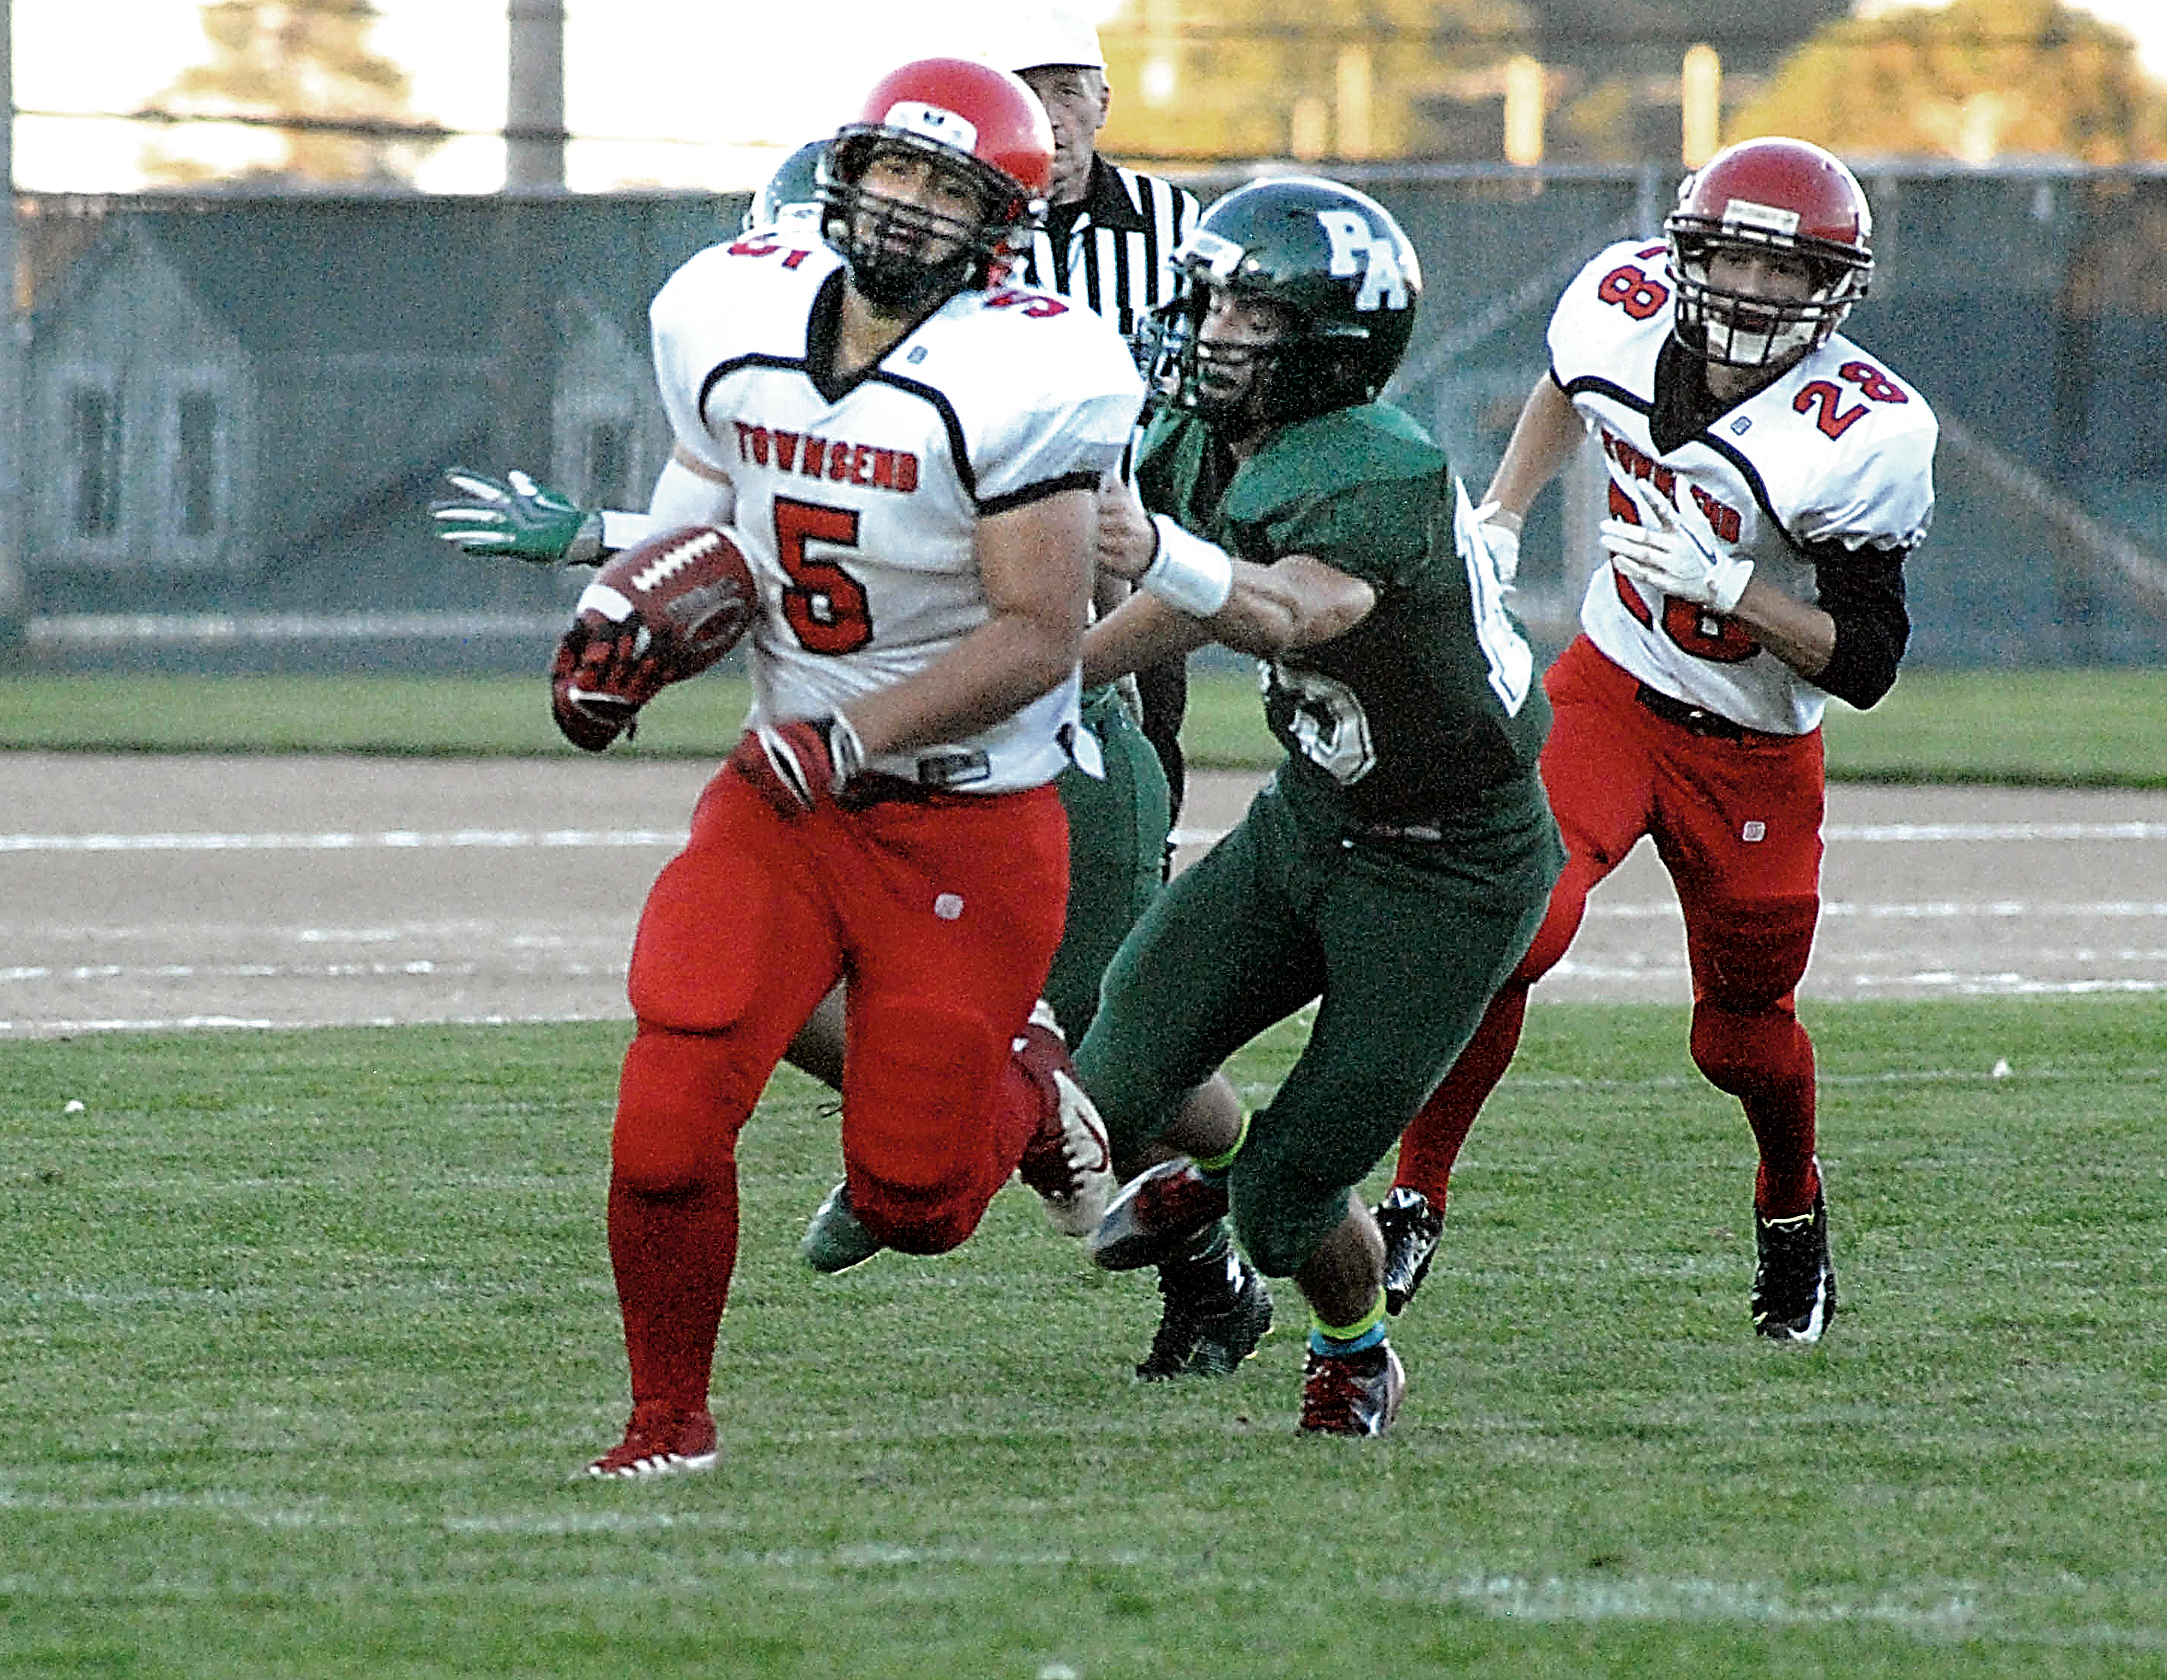 David Sua runs against Port Angeles during the 2014 season opener. The Redhawks and Roughriders will meet again in tonight's season opener for both teams at Memorial Field in Port Townsend. Sequim and Chimacum also will play. Keith Thorpe/Peninsula Daily News